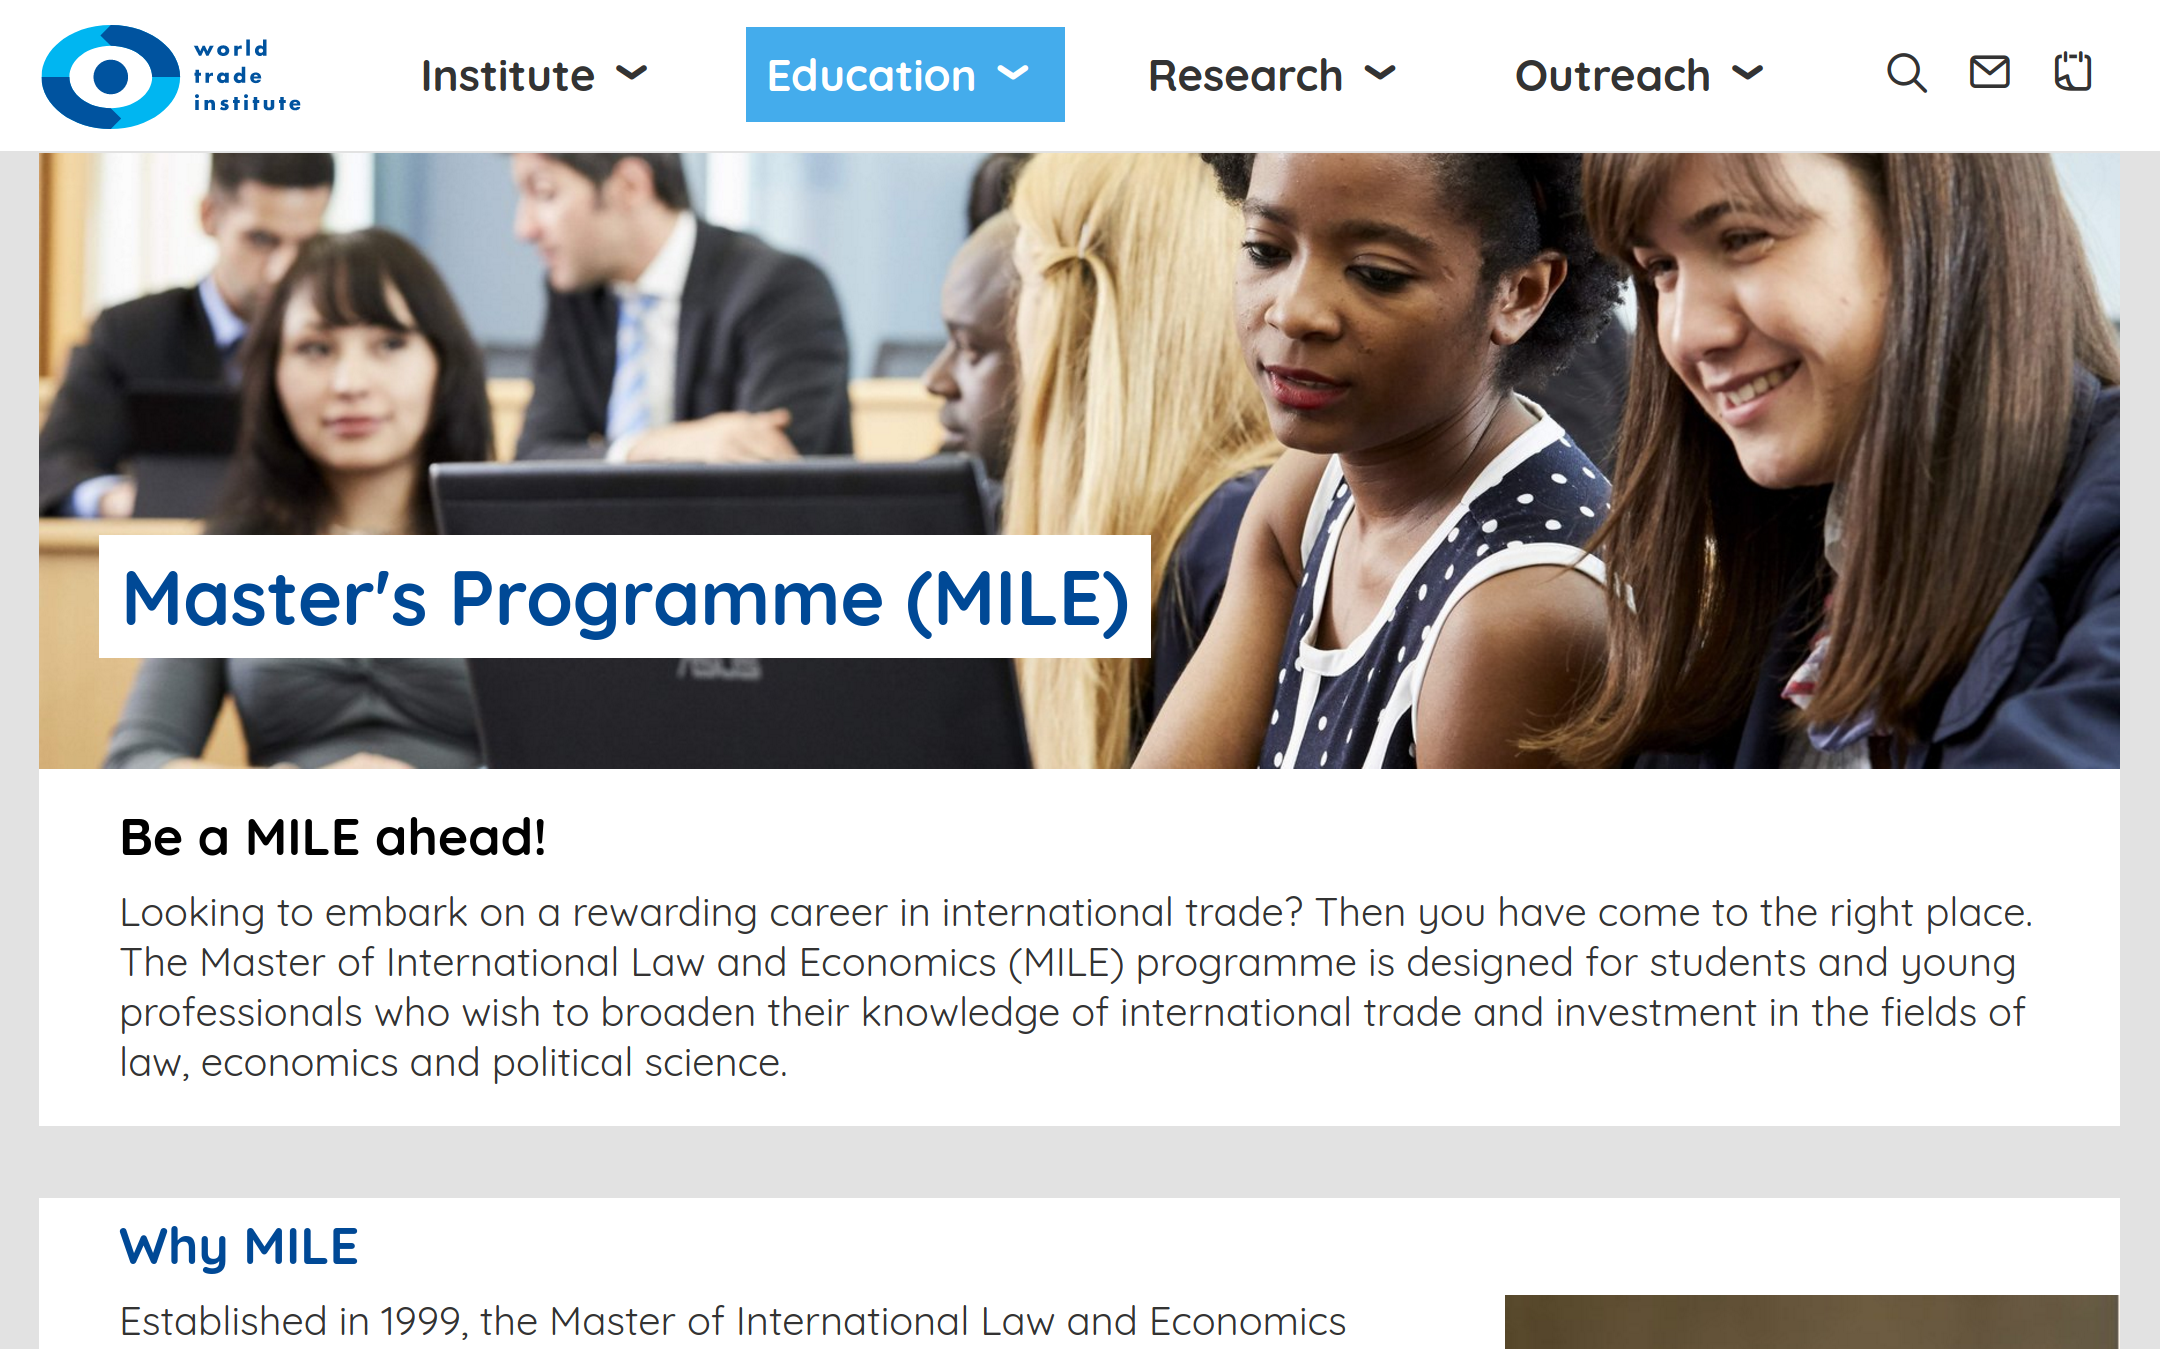 About the MILE / World Trade Institute